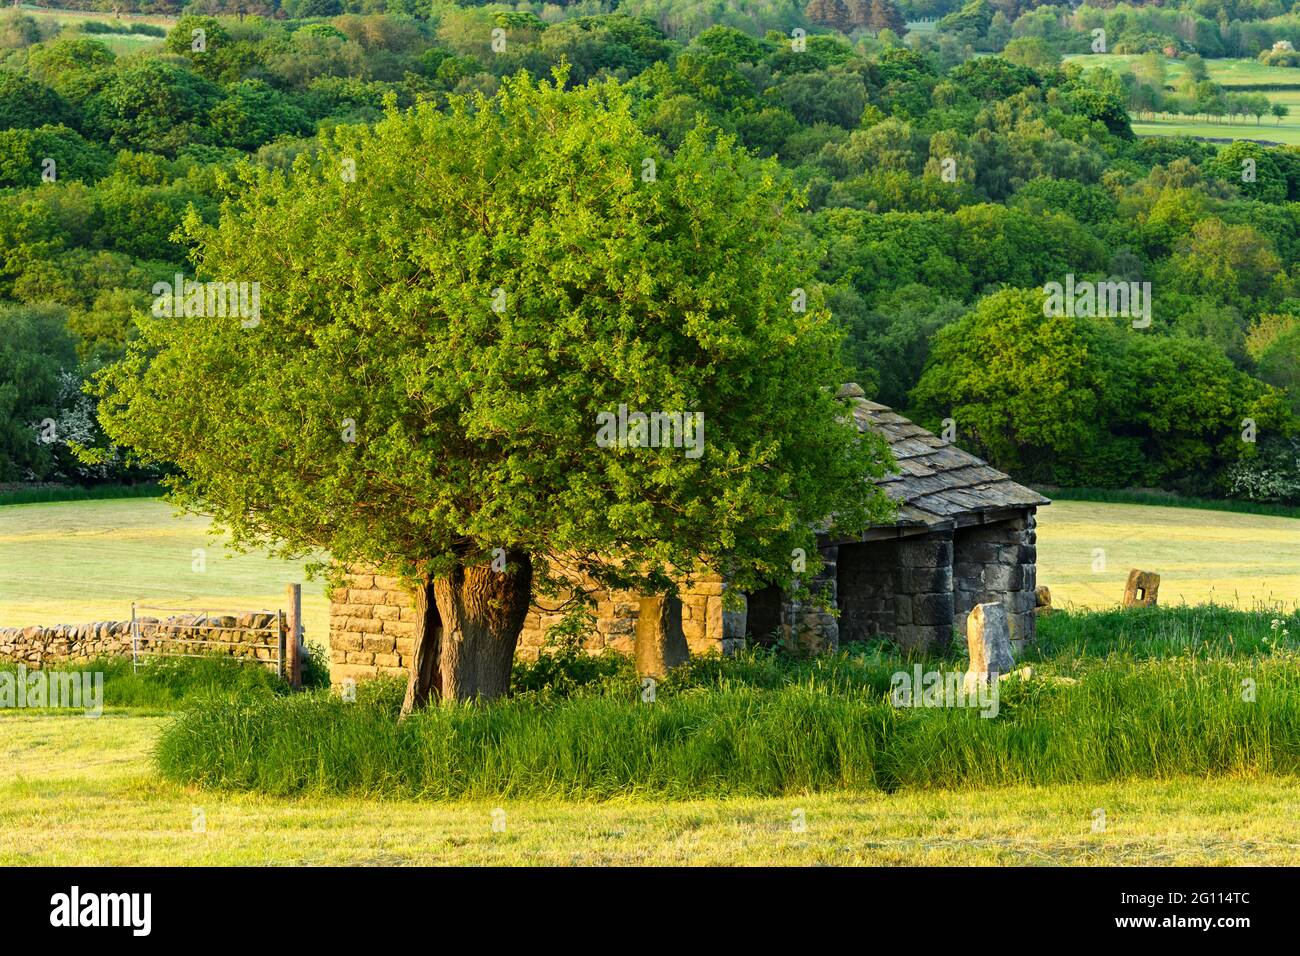 Isolated old stone field barn in scenic countryside (sunlit fields, woodland trees, valley hillside, cut & uncut grass) - West Yorkshire, England UK. Stock Photo